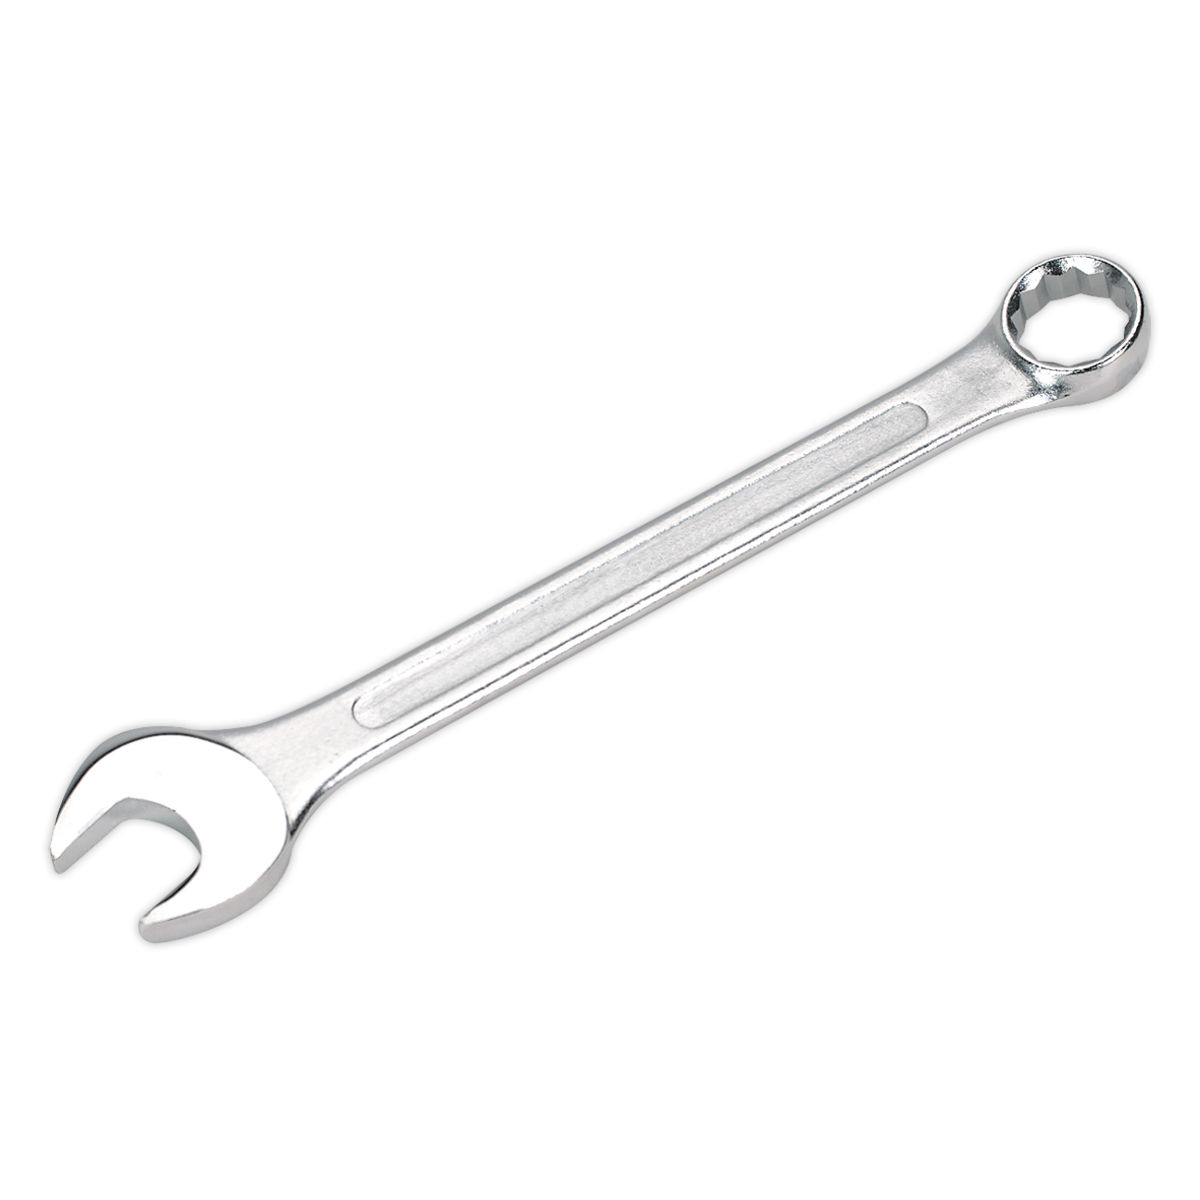 Sealey S0421 Combination Spanner 21mm